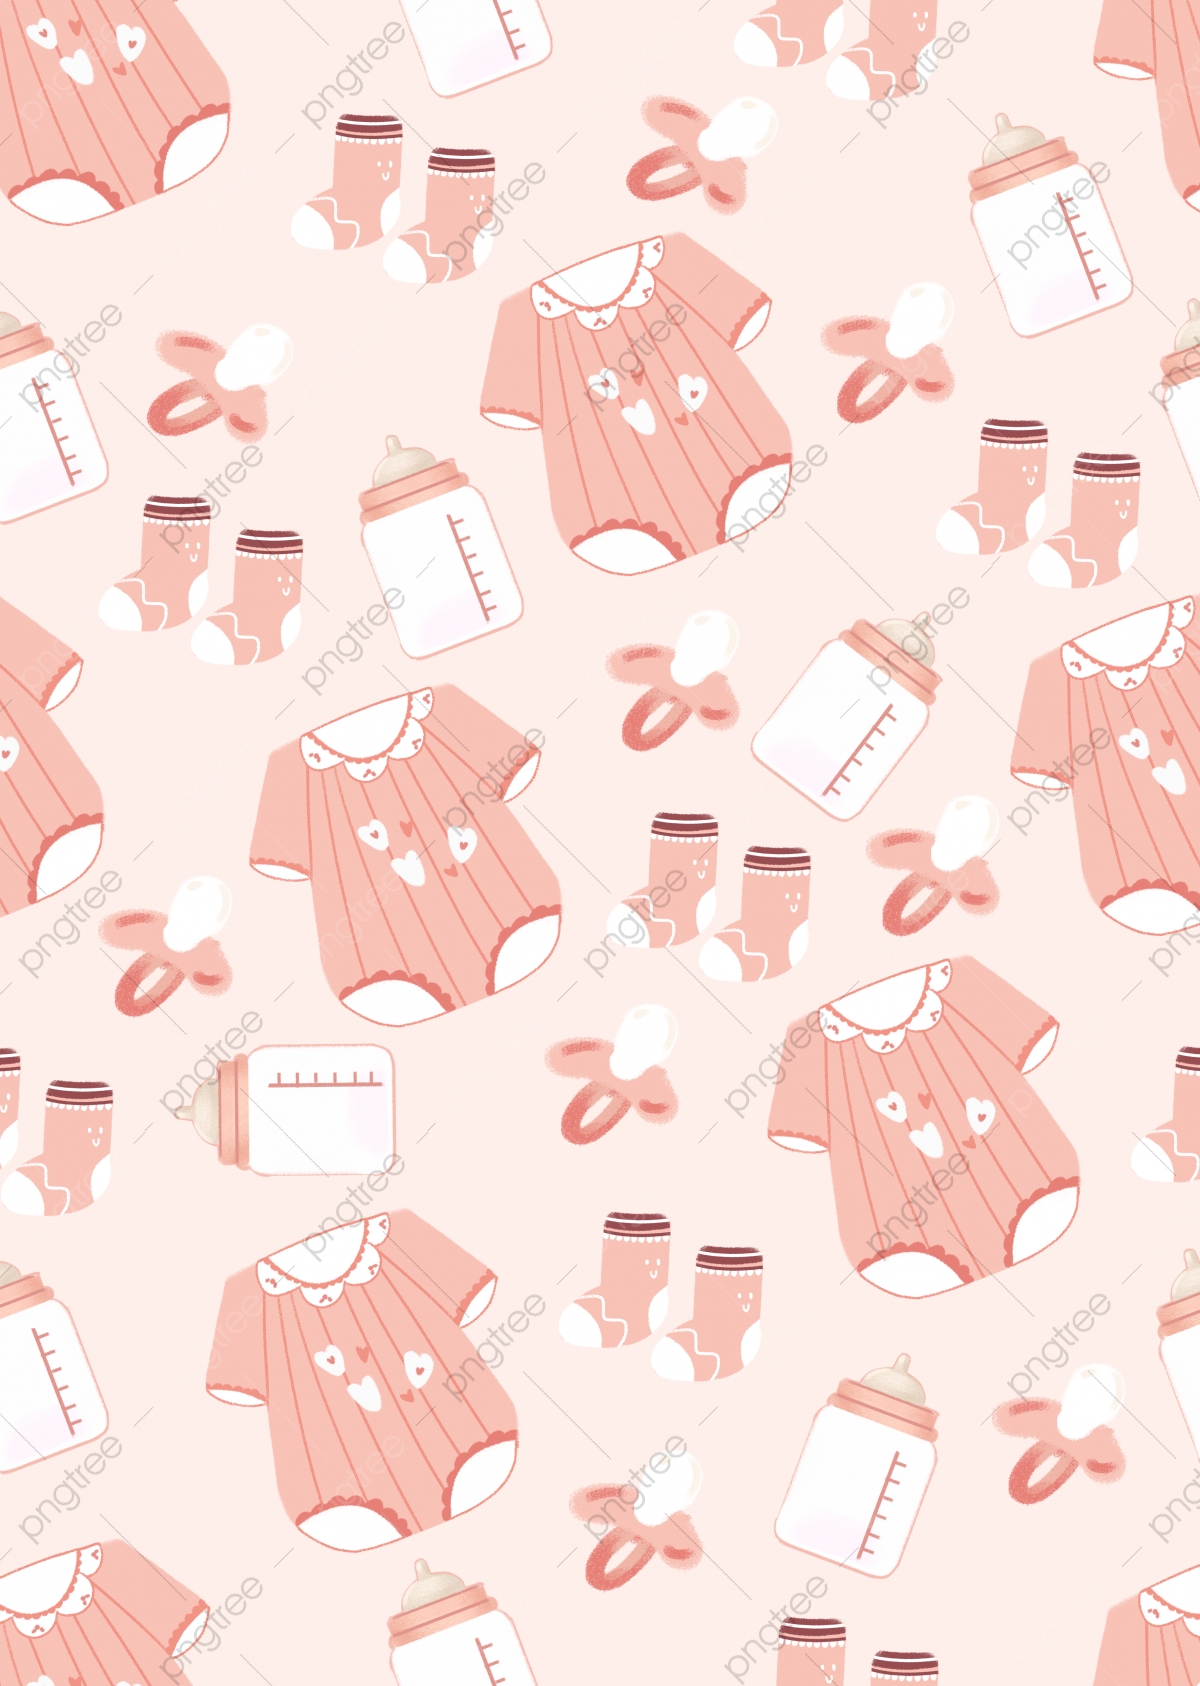 Cute Clothes Background